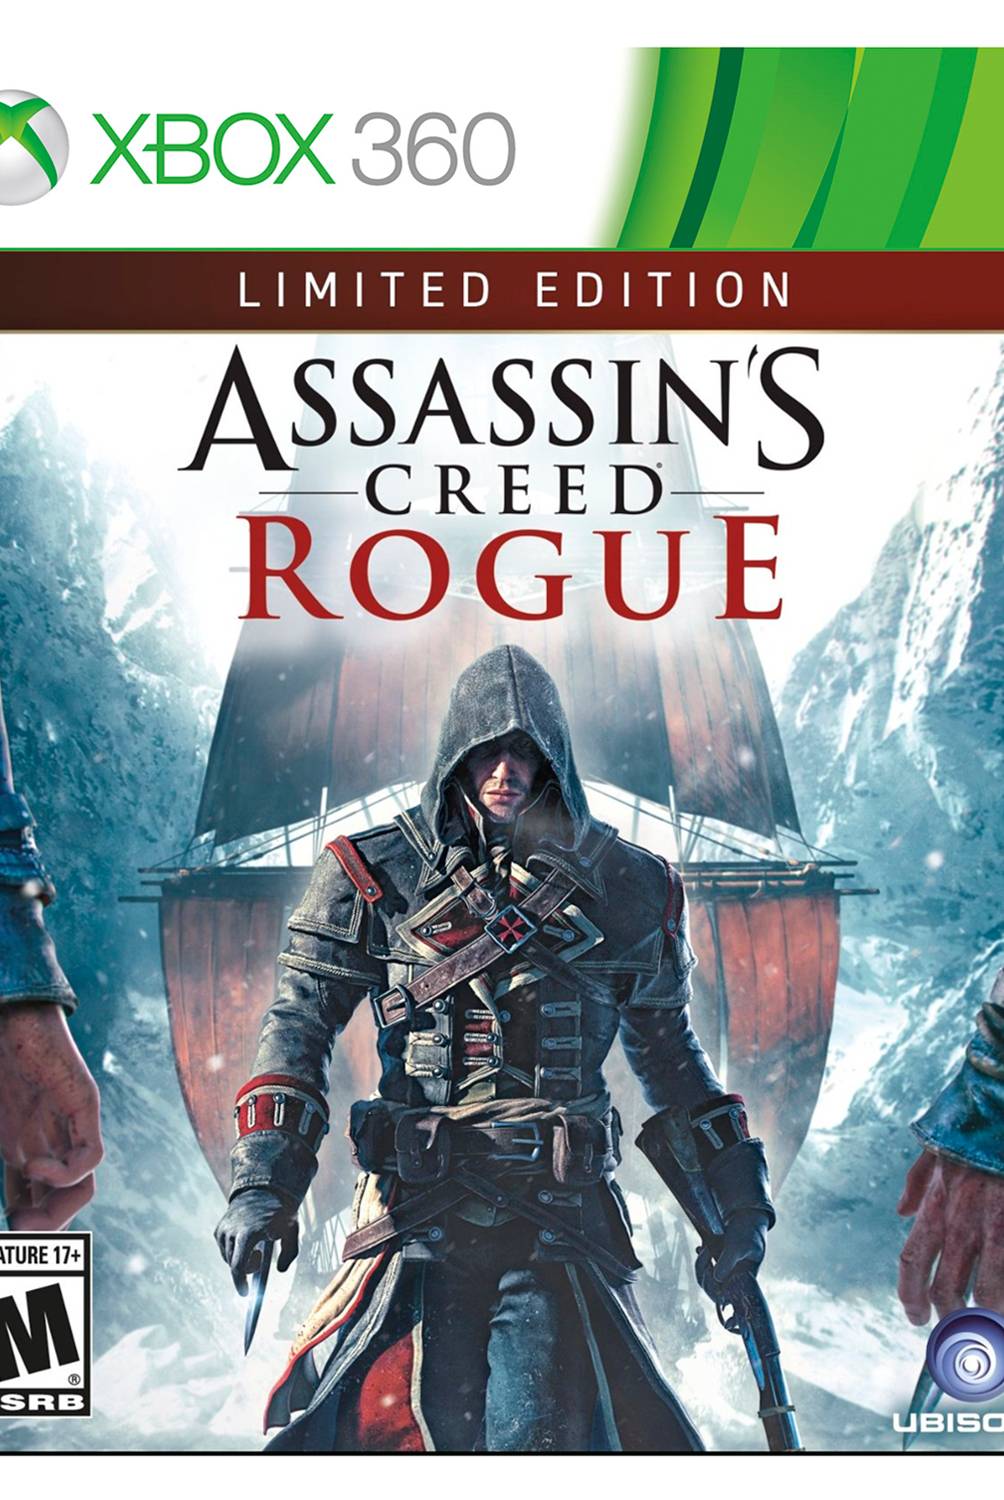 Ubisoft - Assassin's Creed Rogue Limited Edition Xbox 360